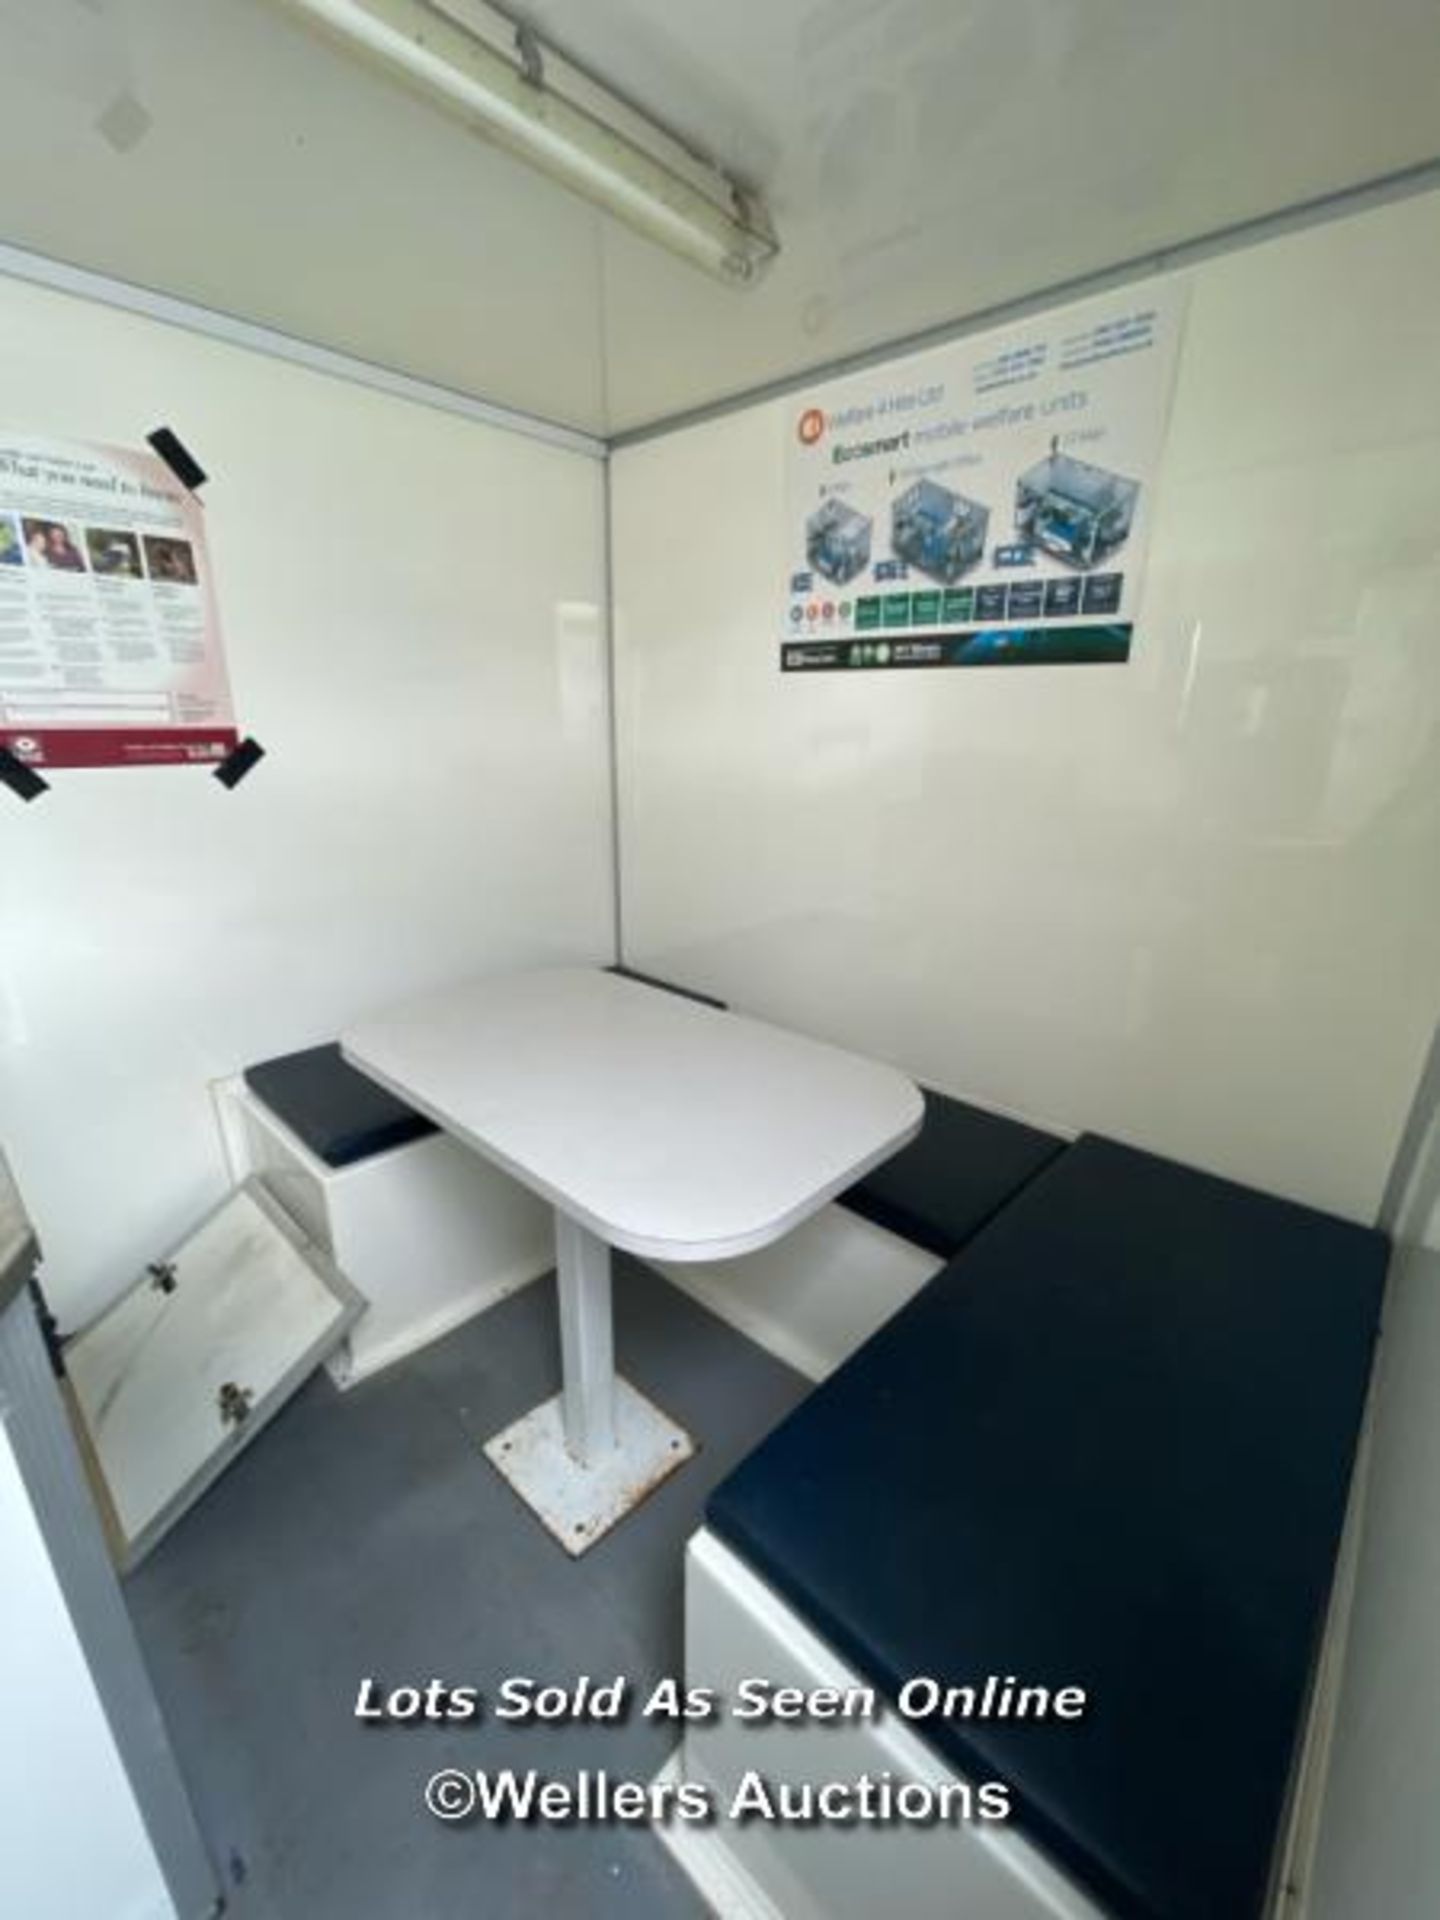 6 PERSON 12 X 7.5FT AJC EASY CABIN TOWABLE WELFARE UNIT, INCLUDES WASH BASIN, KETTLE, MICROWAVE, - Image 6 of 19